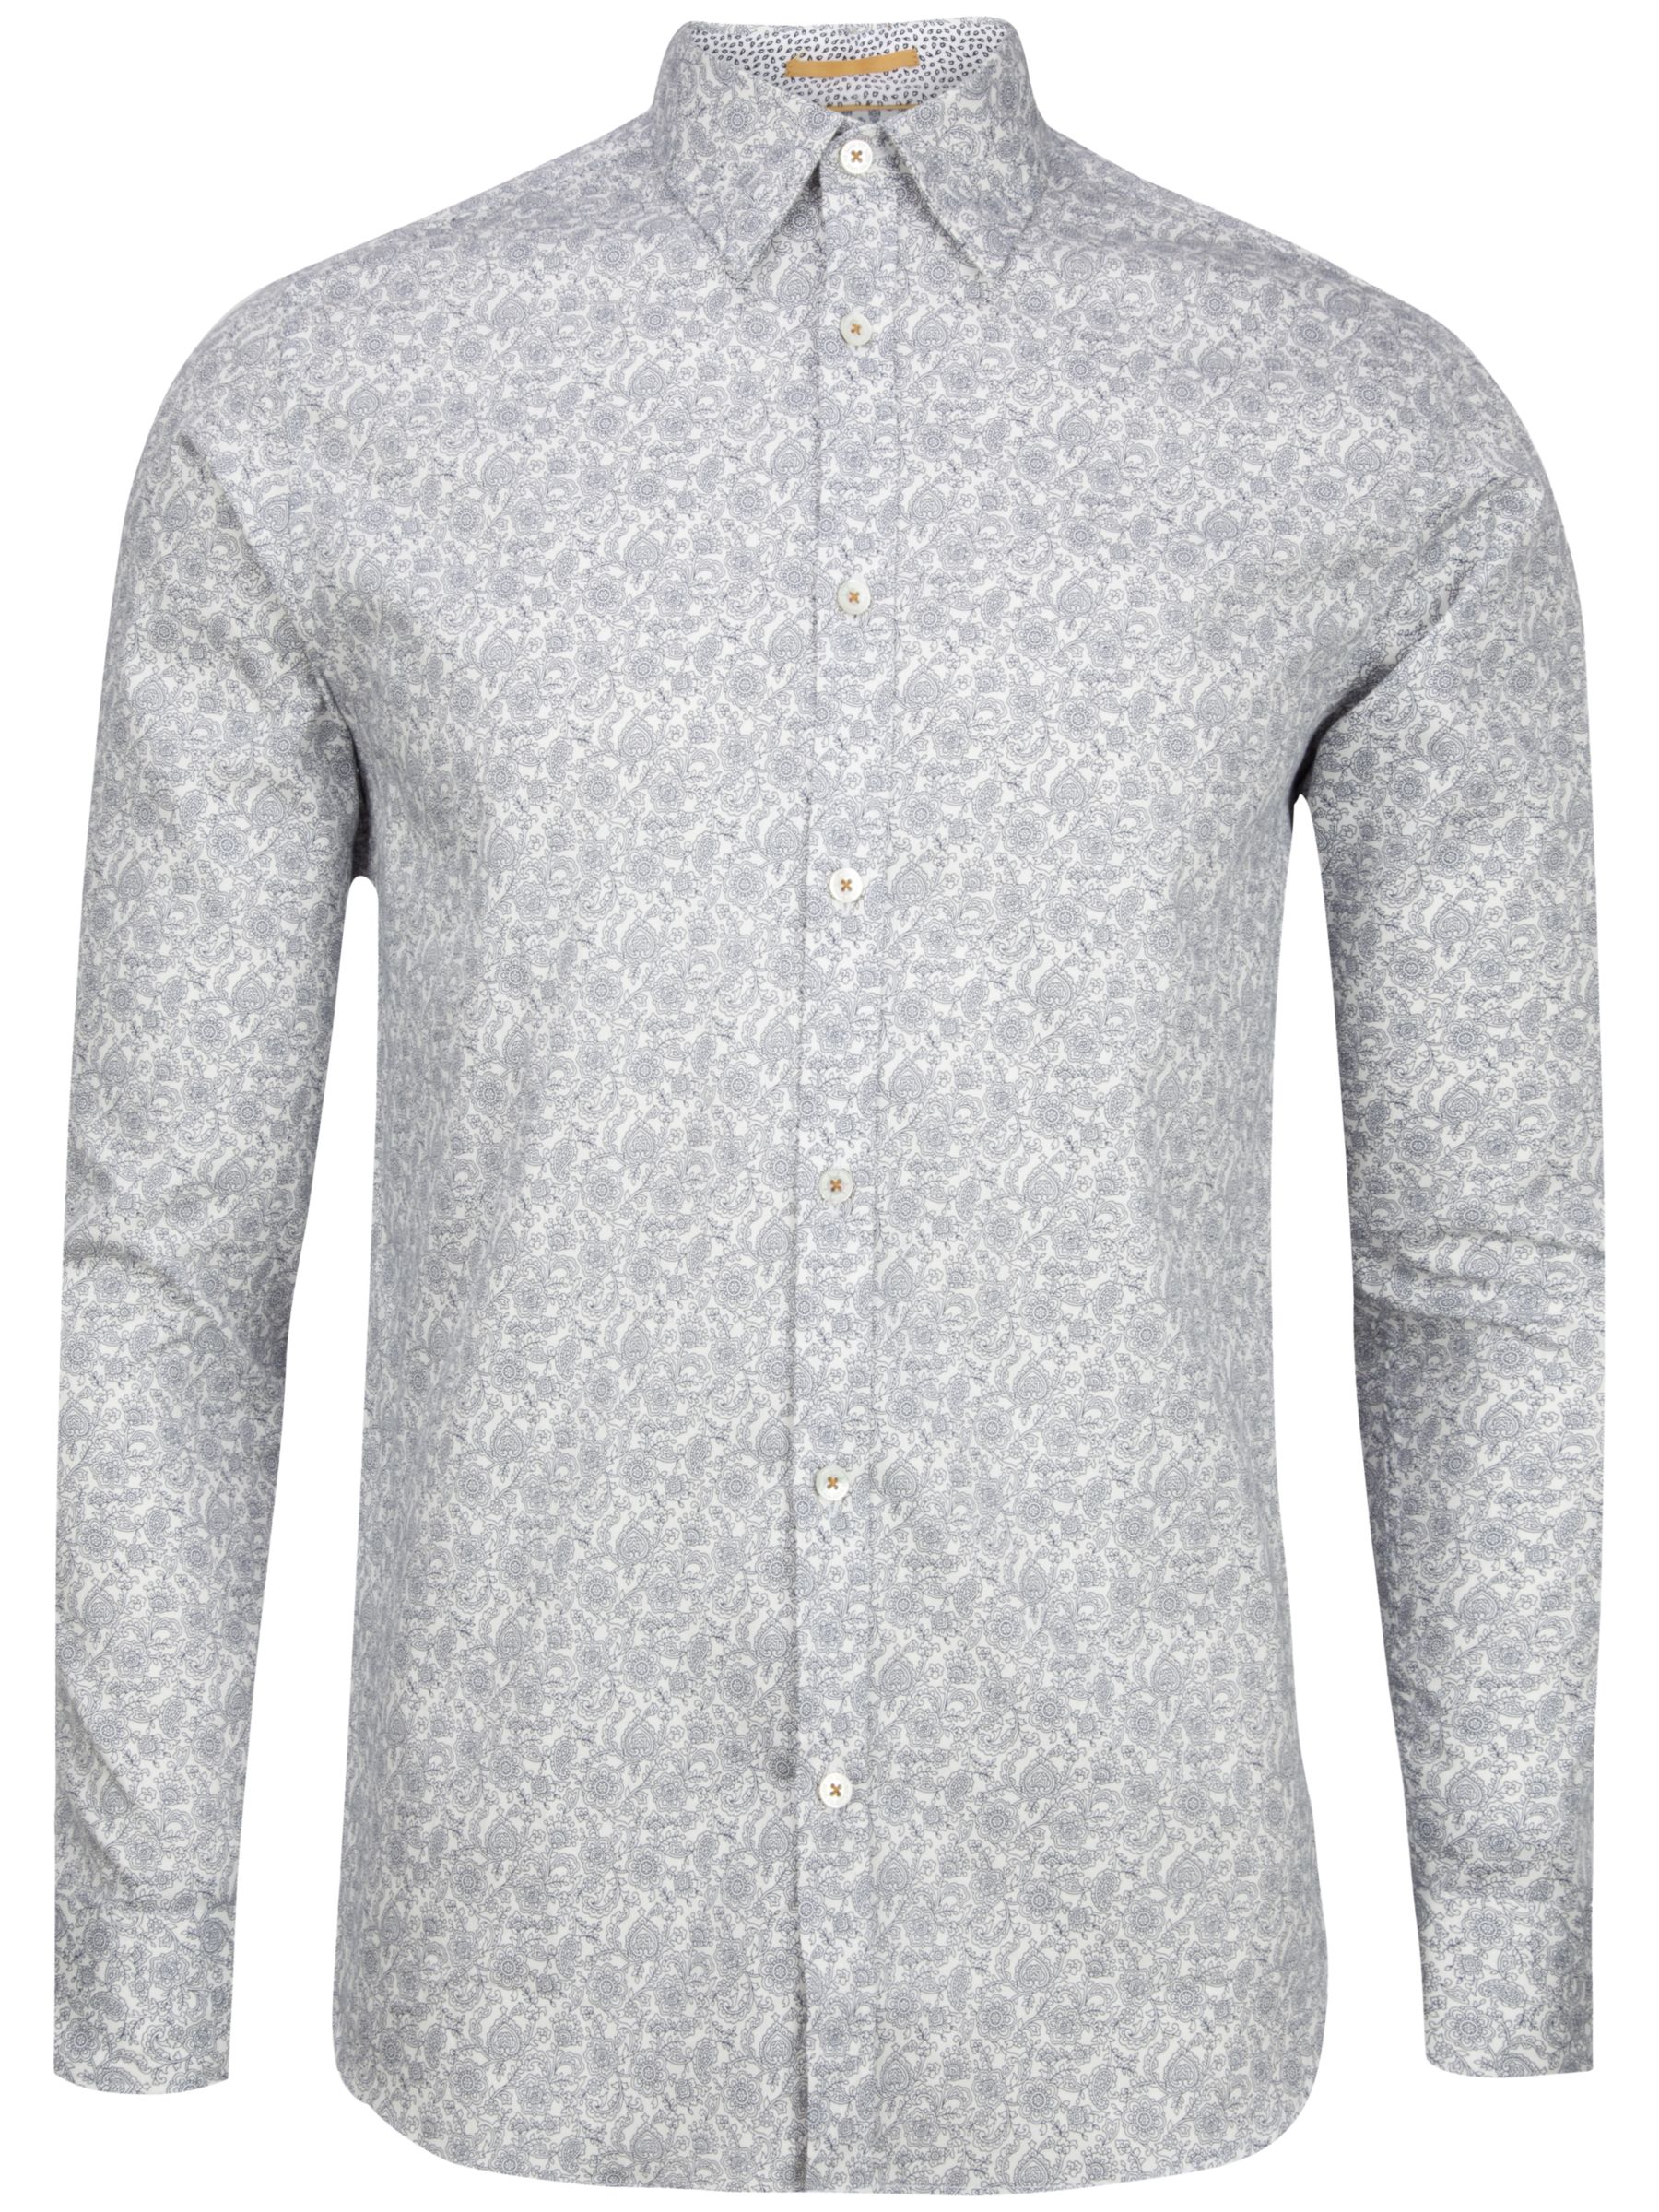 Ted Baker Florall Floral Print Long Sleeve Shirt, White, 6